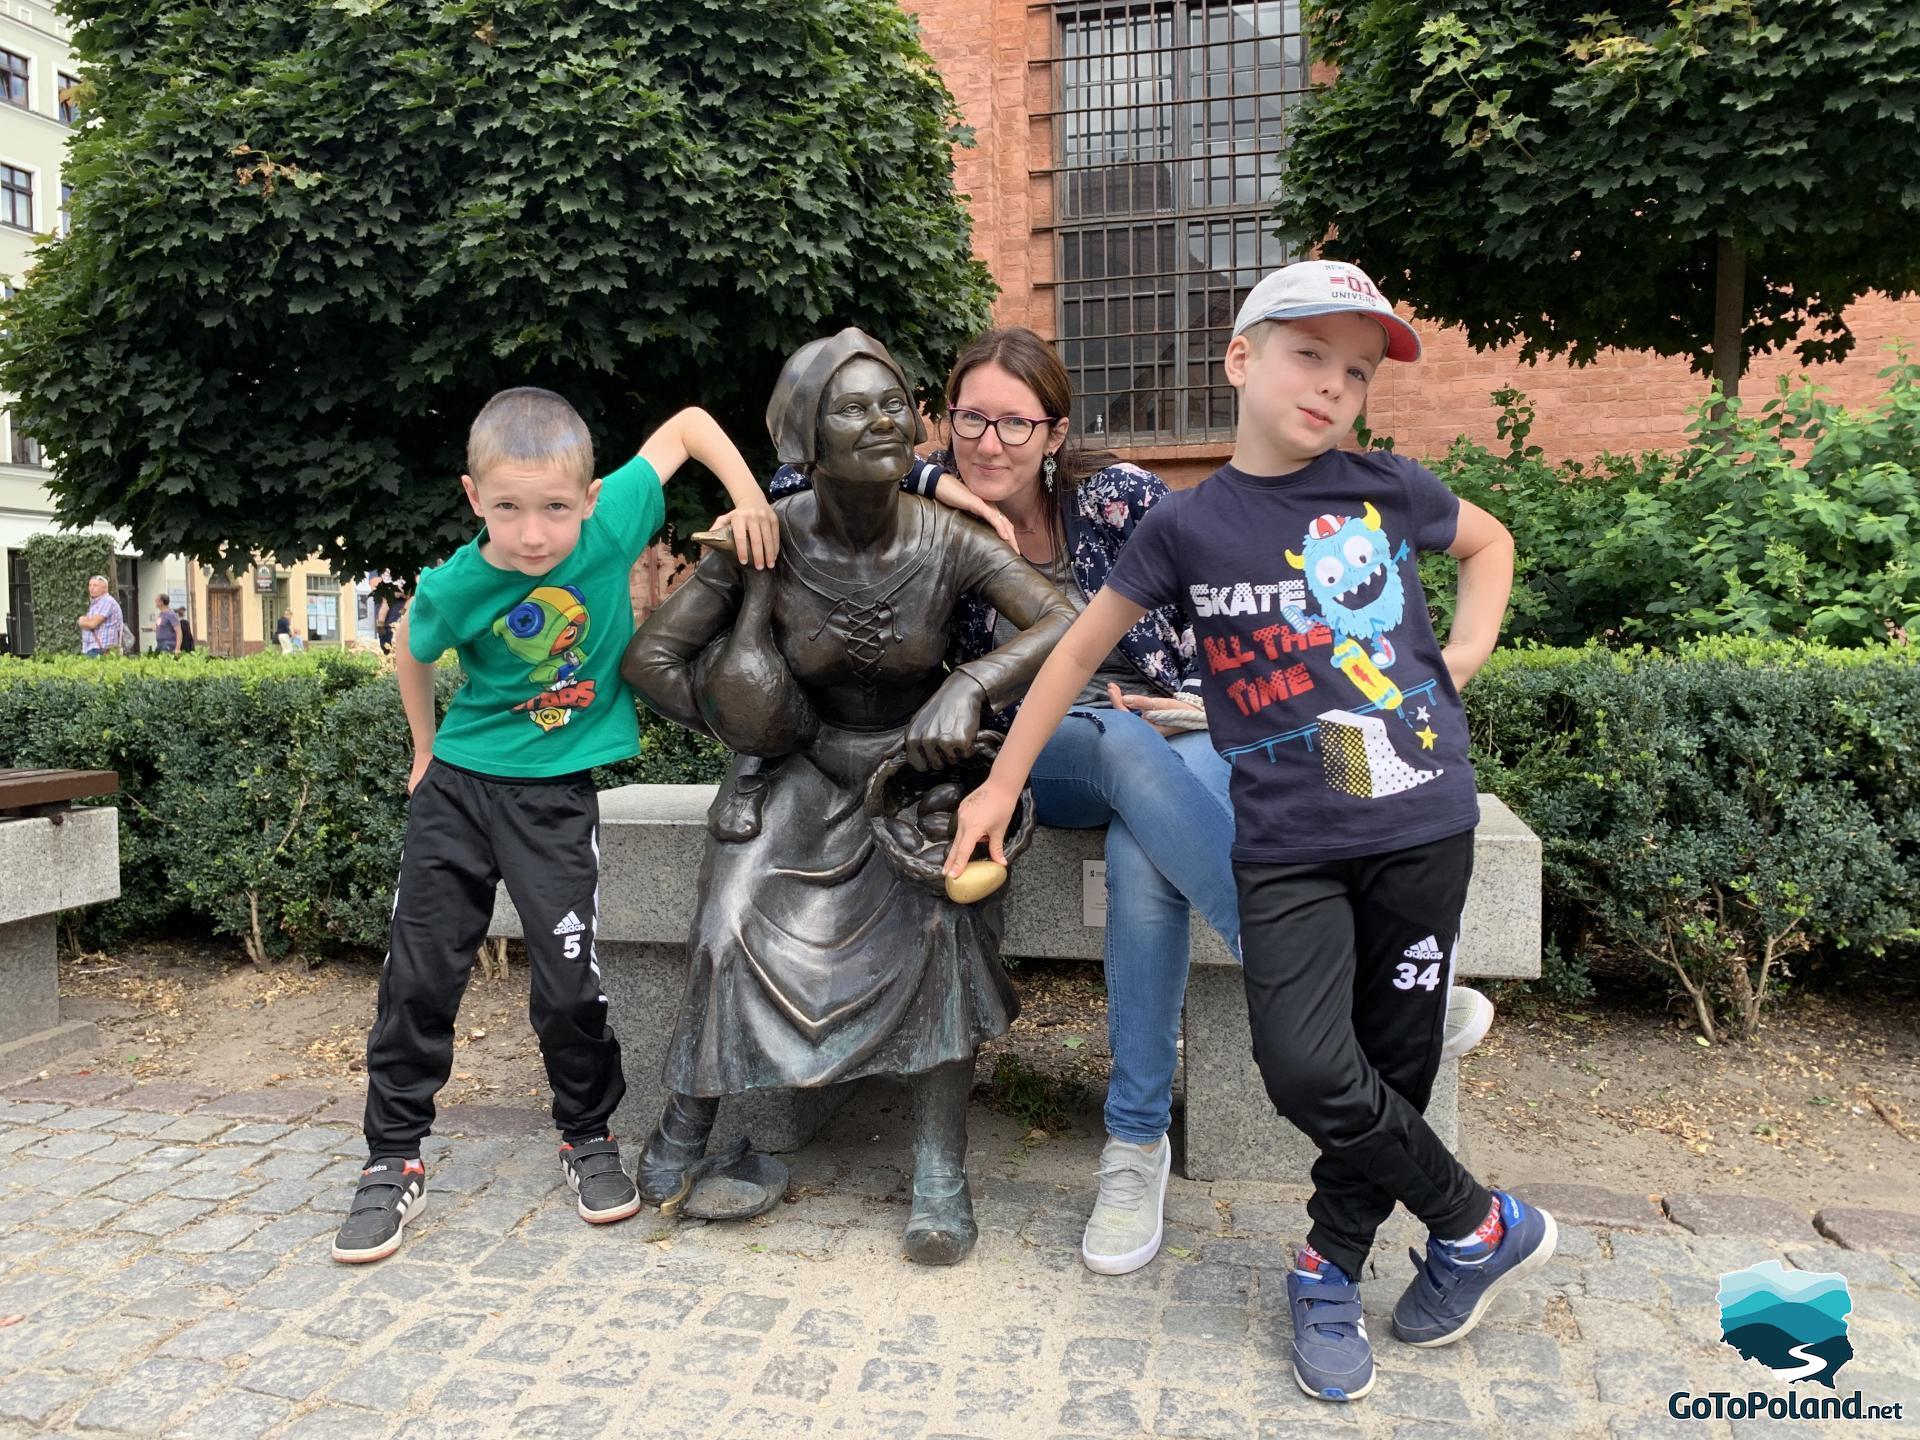 a bronze statue of a peasant woman holding a goose and a basket of eggs in the other hand, the statue of the woman is on a bench, next to her is a woman and two boys, one of them is touching a golden egg, which according to legend is supposed to bring good luck